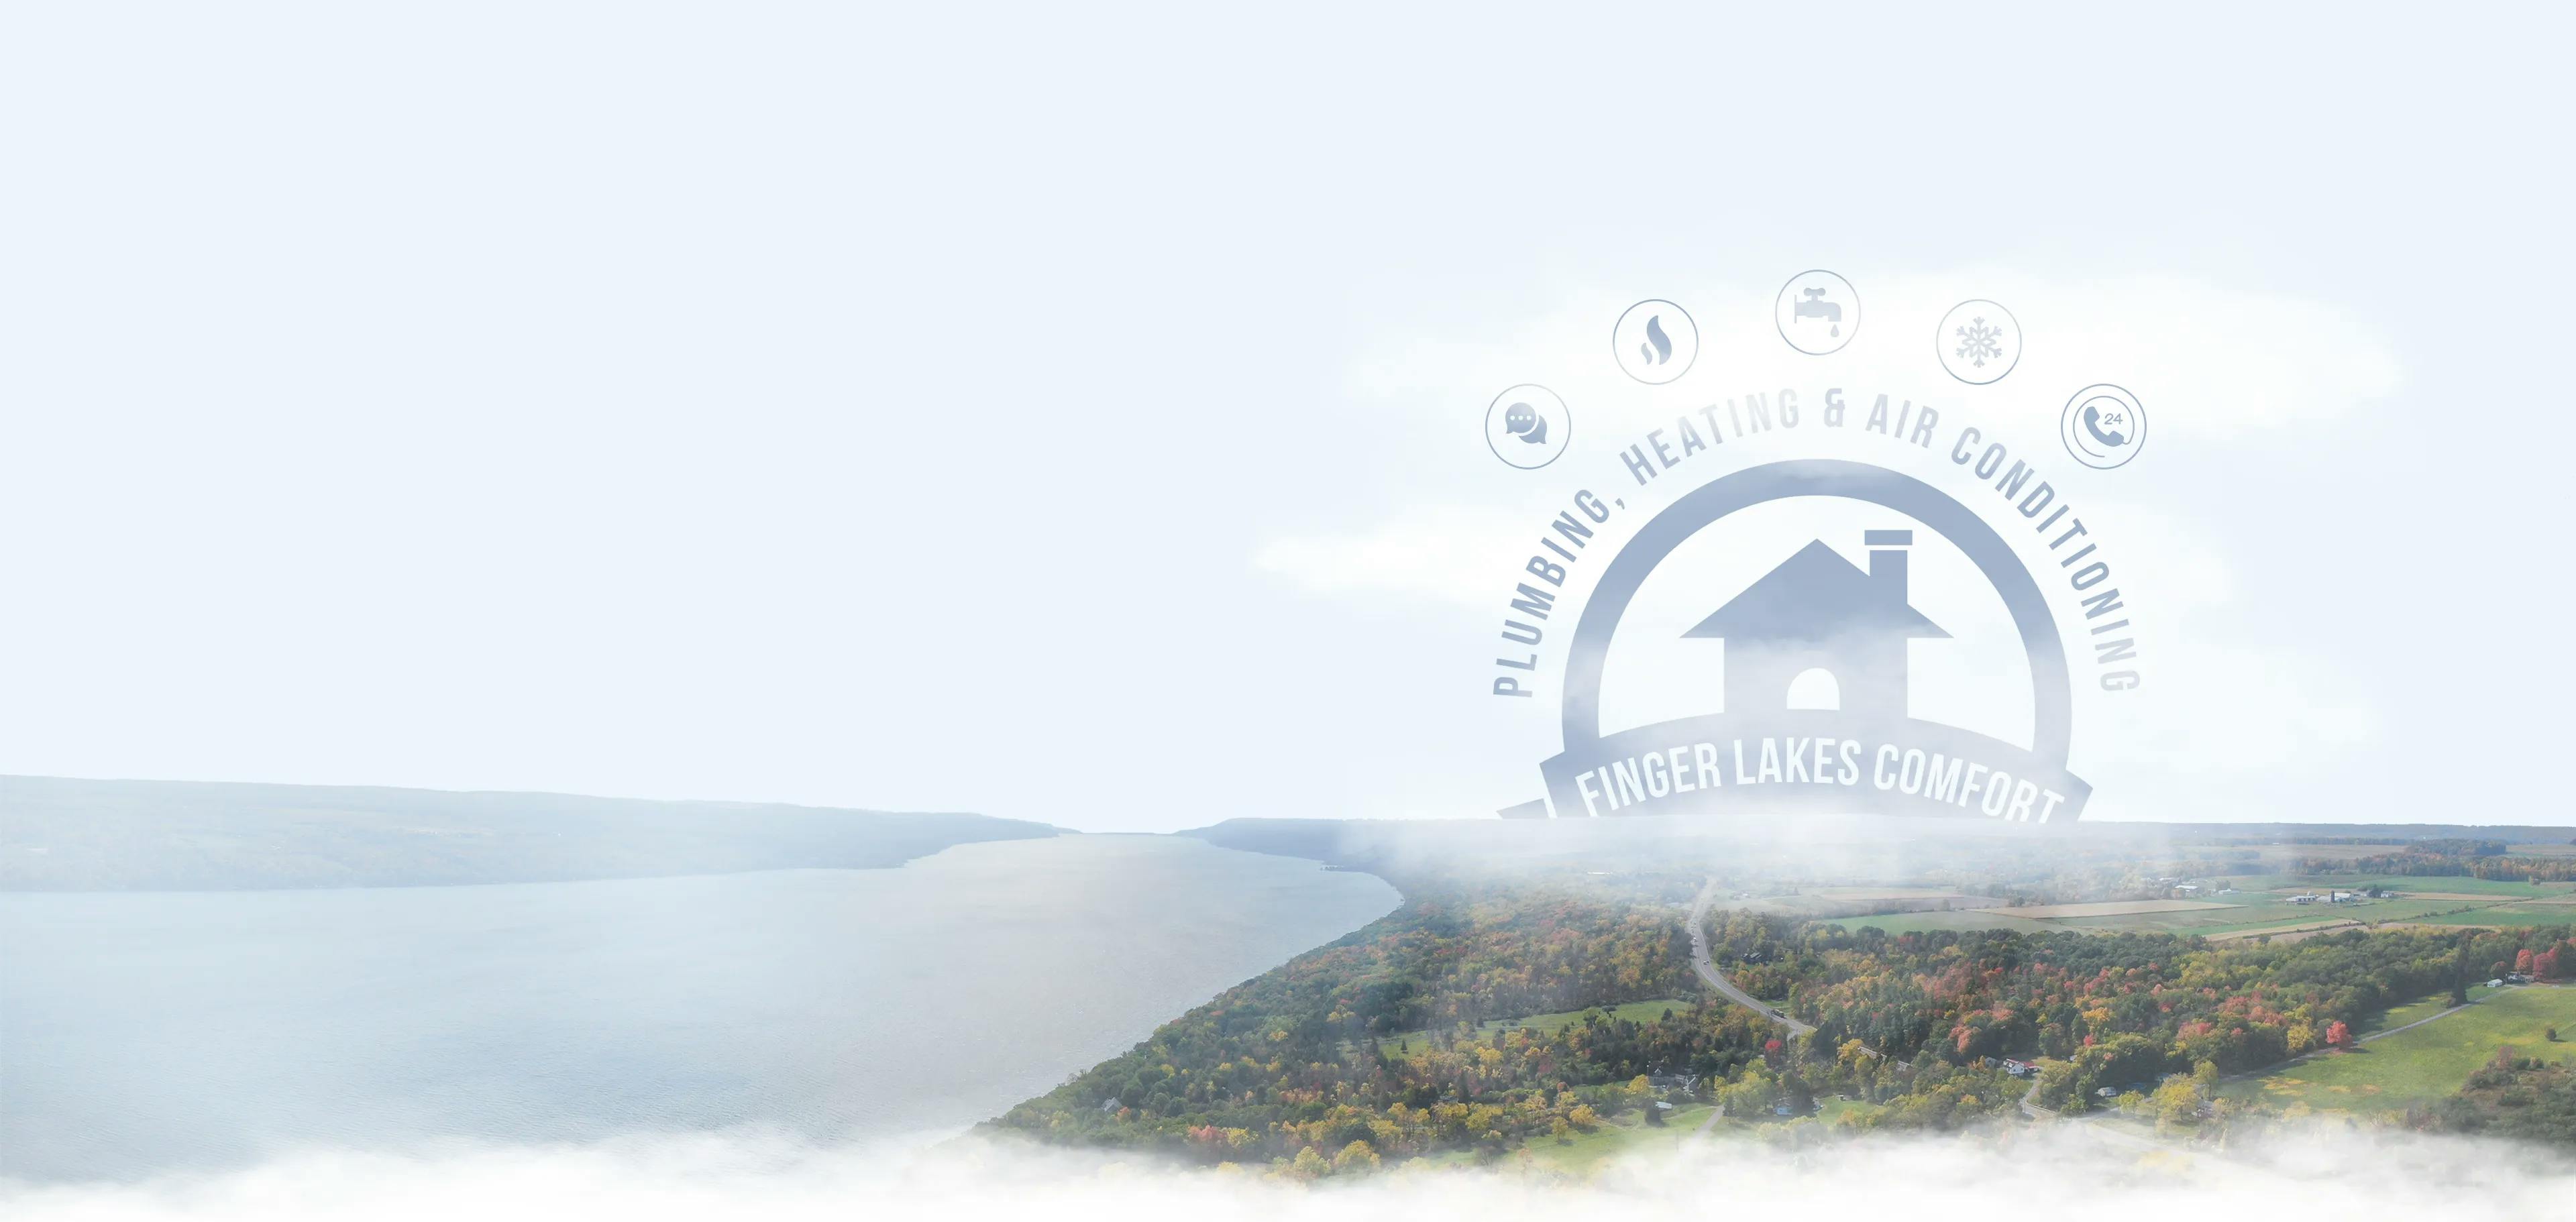 background photo of a lake with the Finger Lakes logo on it